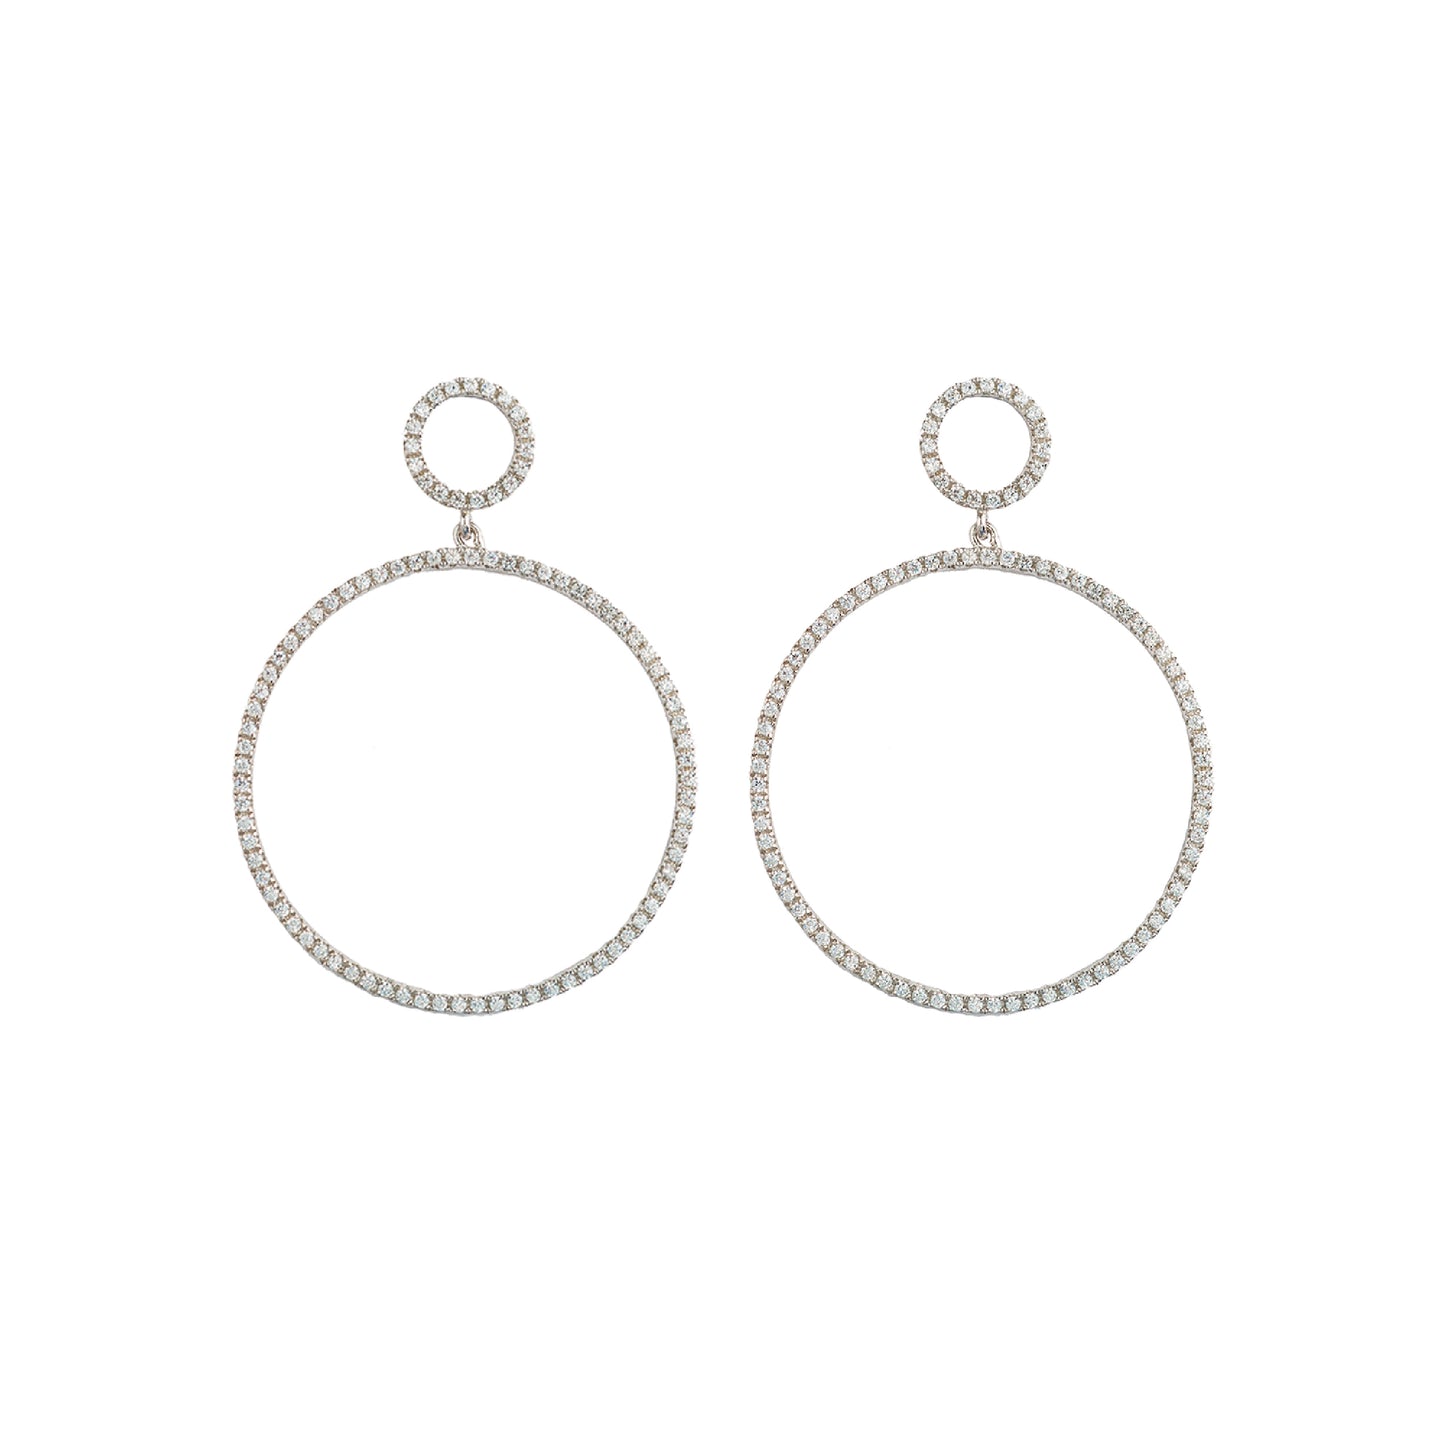 Rhodium Plated Sterling Silver Design Rounded Earrings with White Zirconias